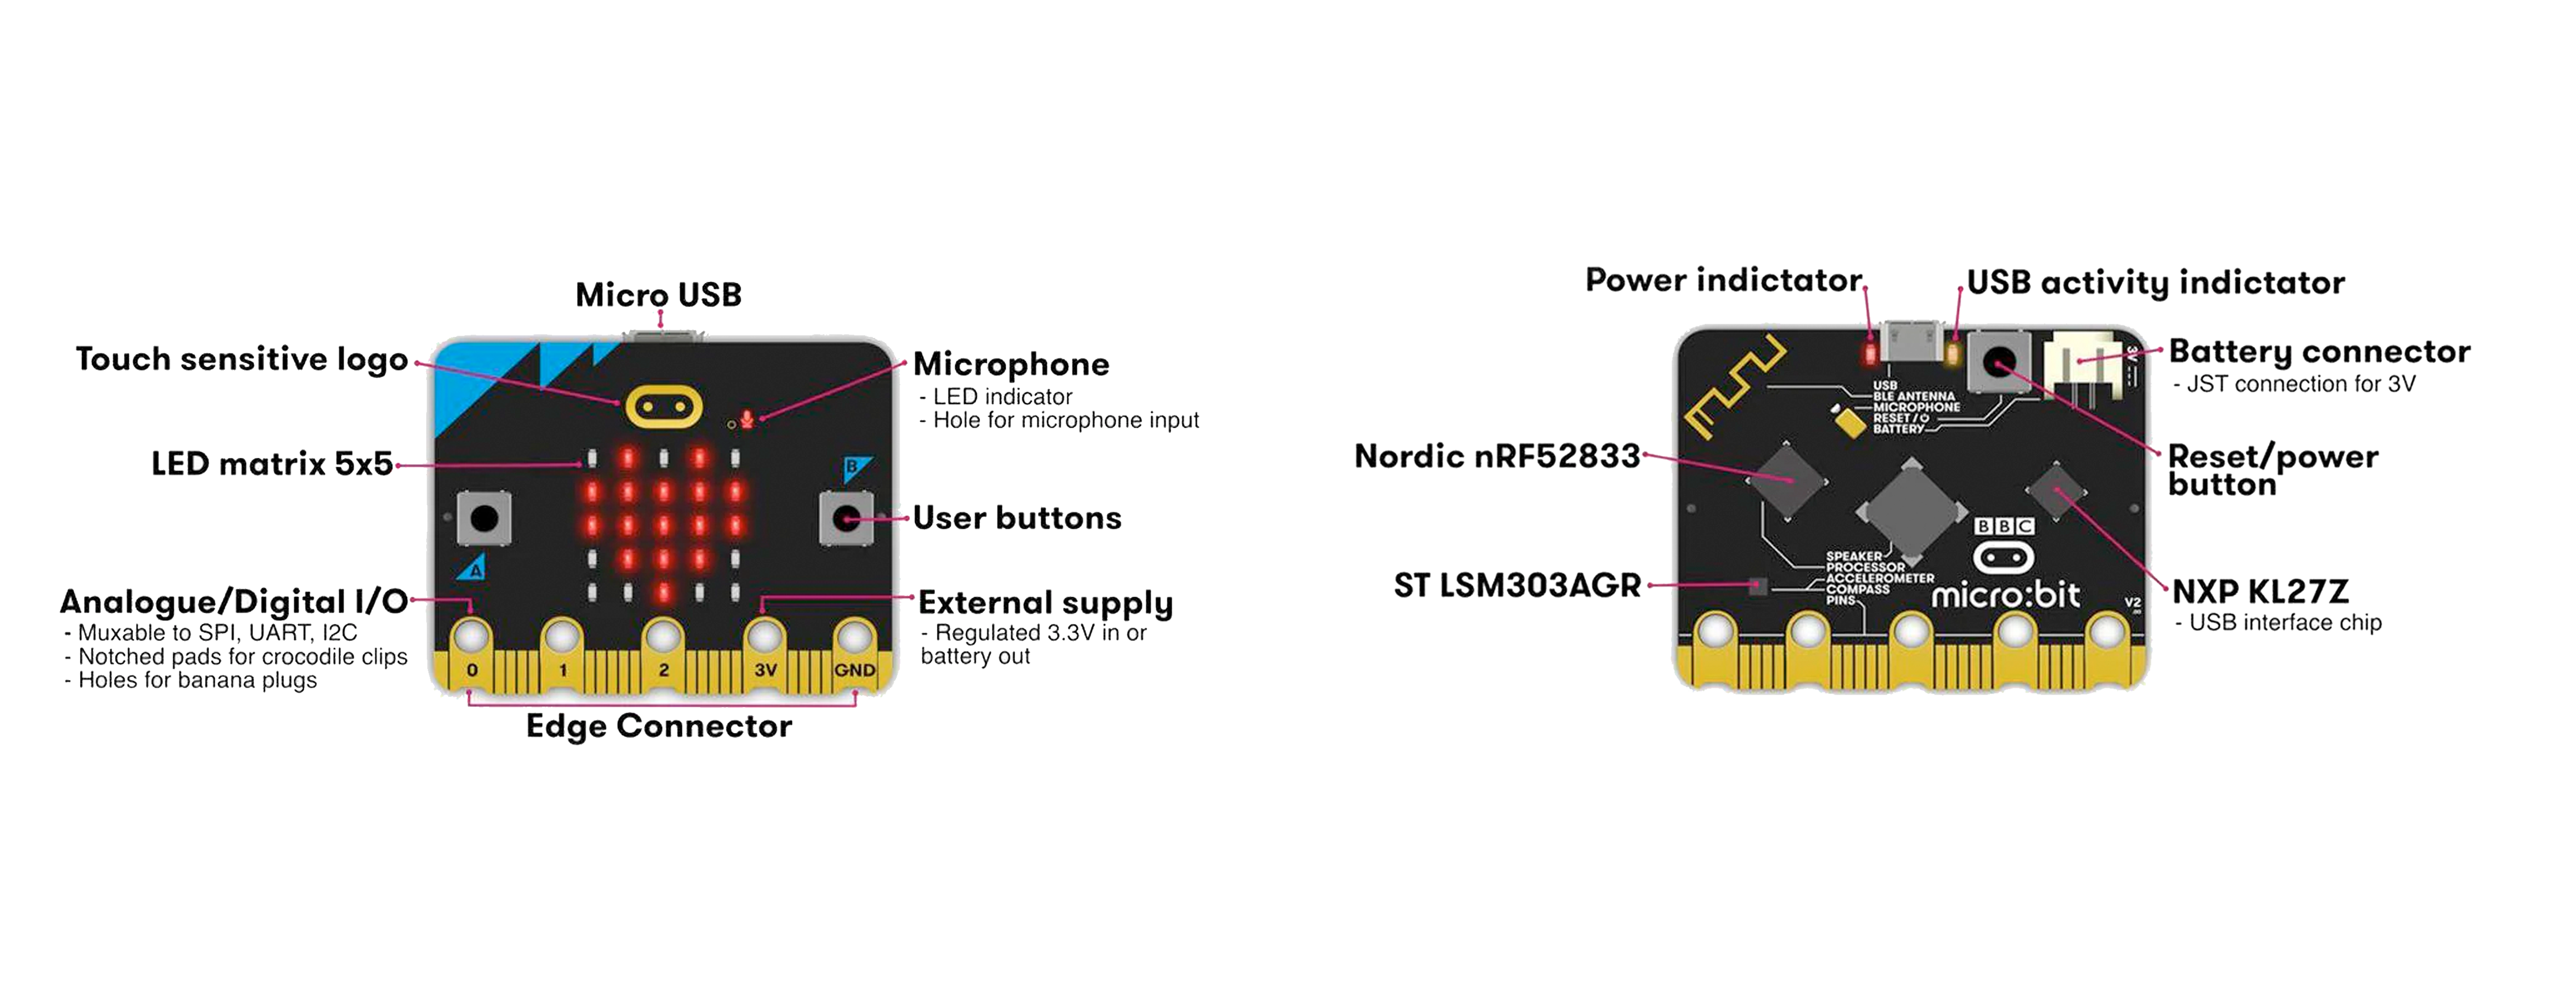 Microbit Specifications